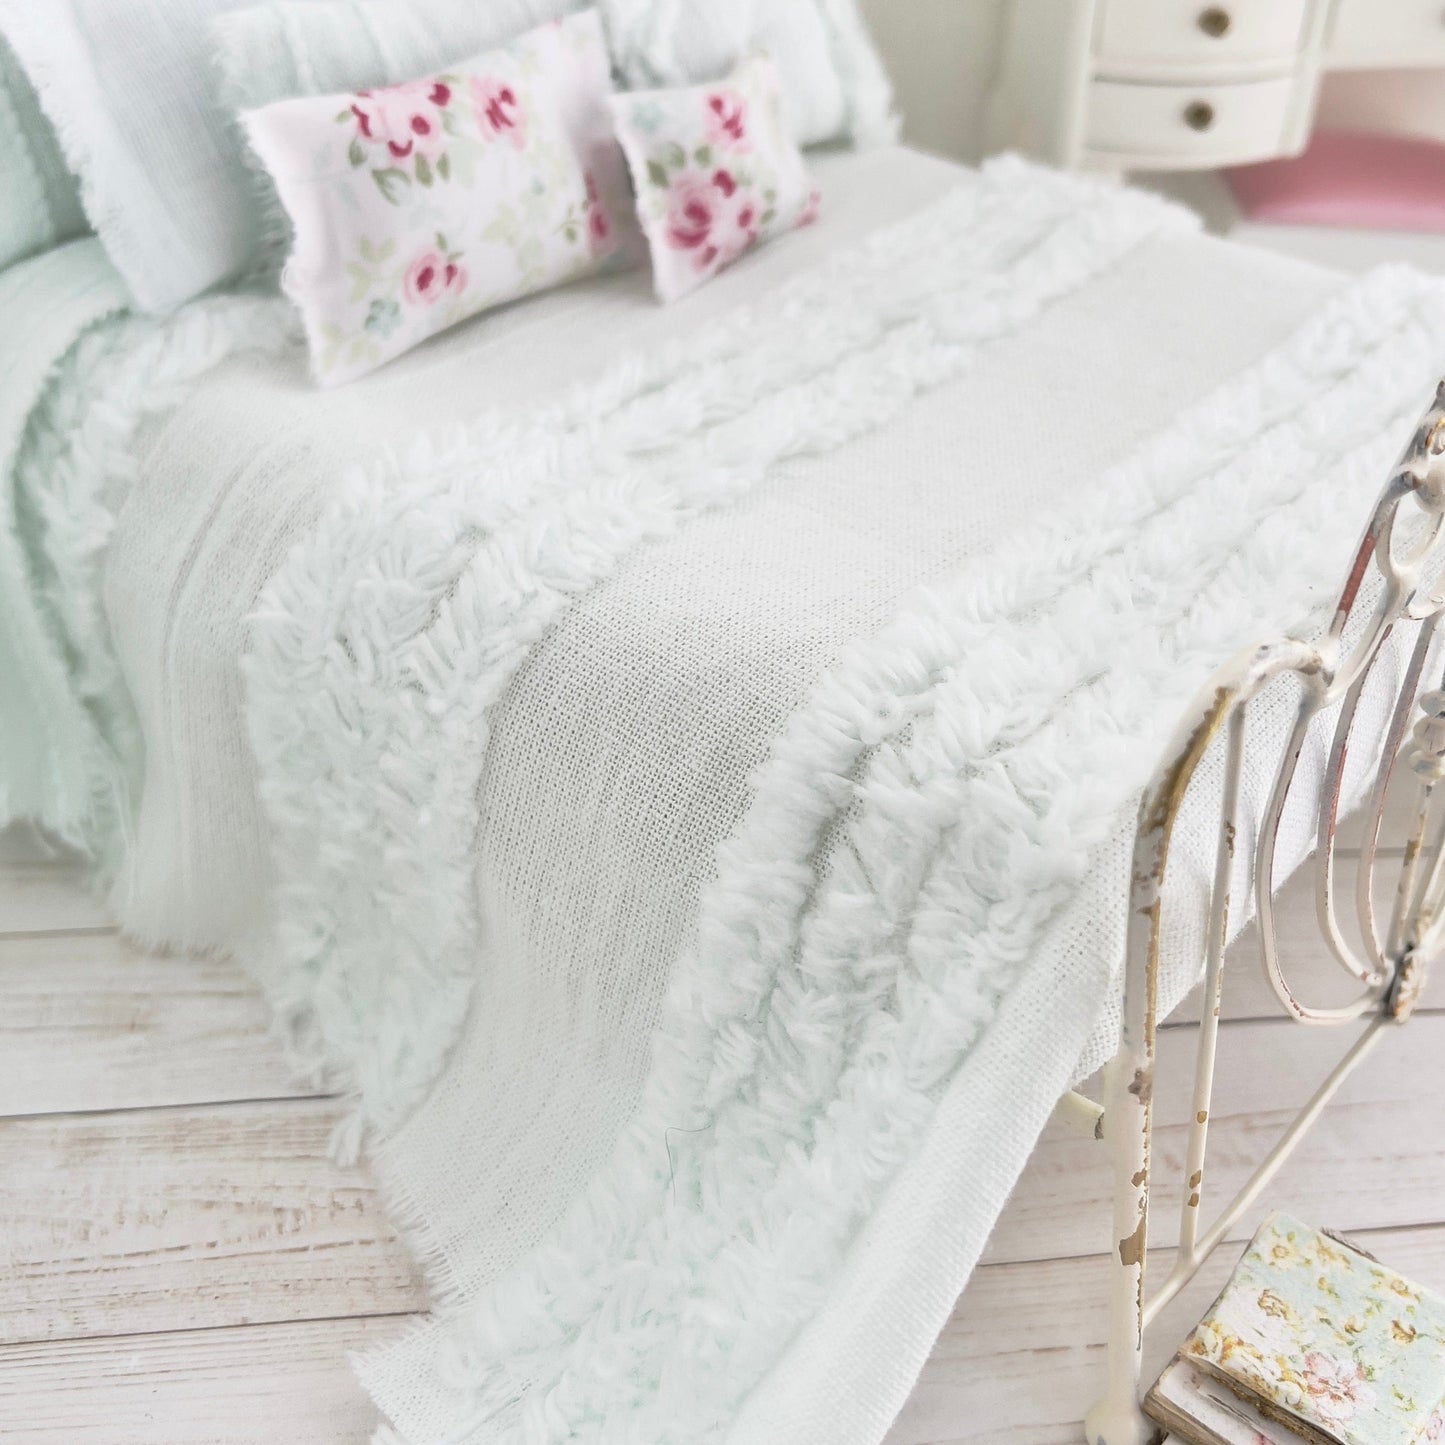 Chantallena White Bed Linens Torn & Tattered- Ten Piece Hand Frayed Pale Green Cotton Chenille Bedspread Set | Shawna